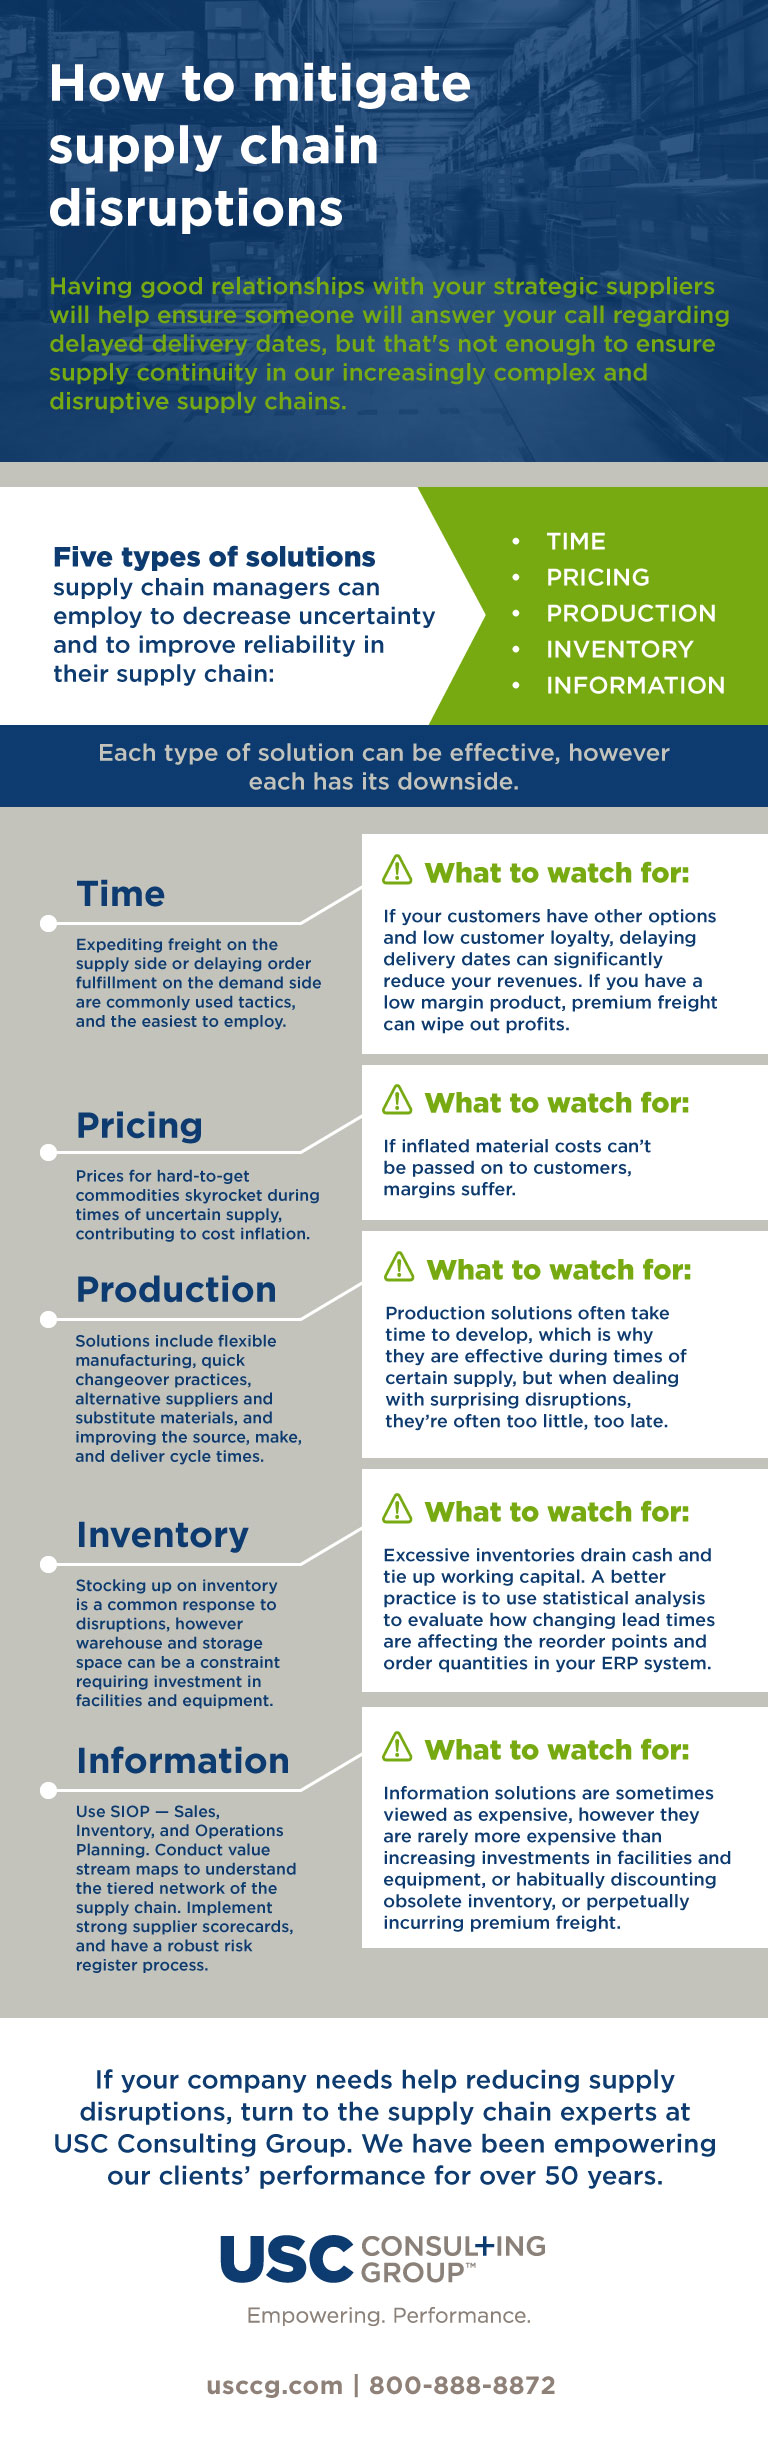 How to mitigate disruptive supply chains infographic